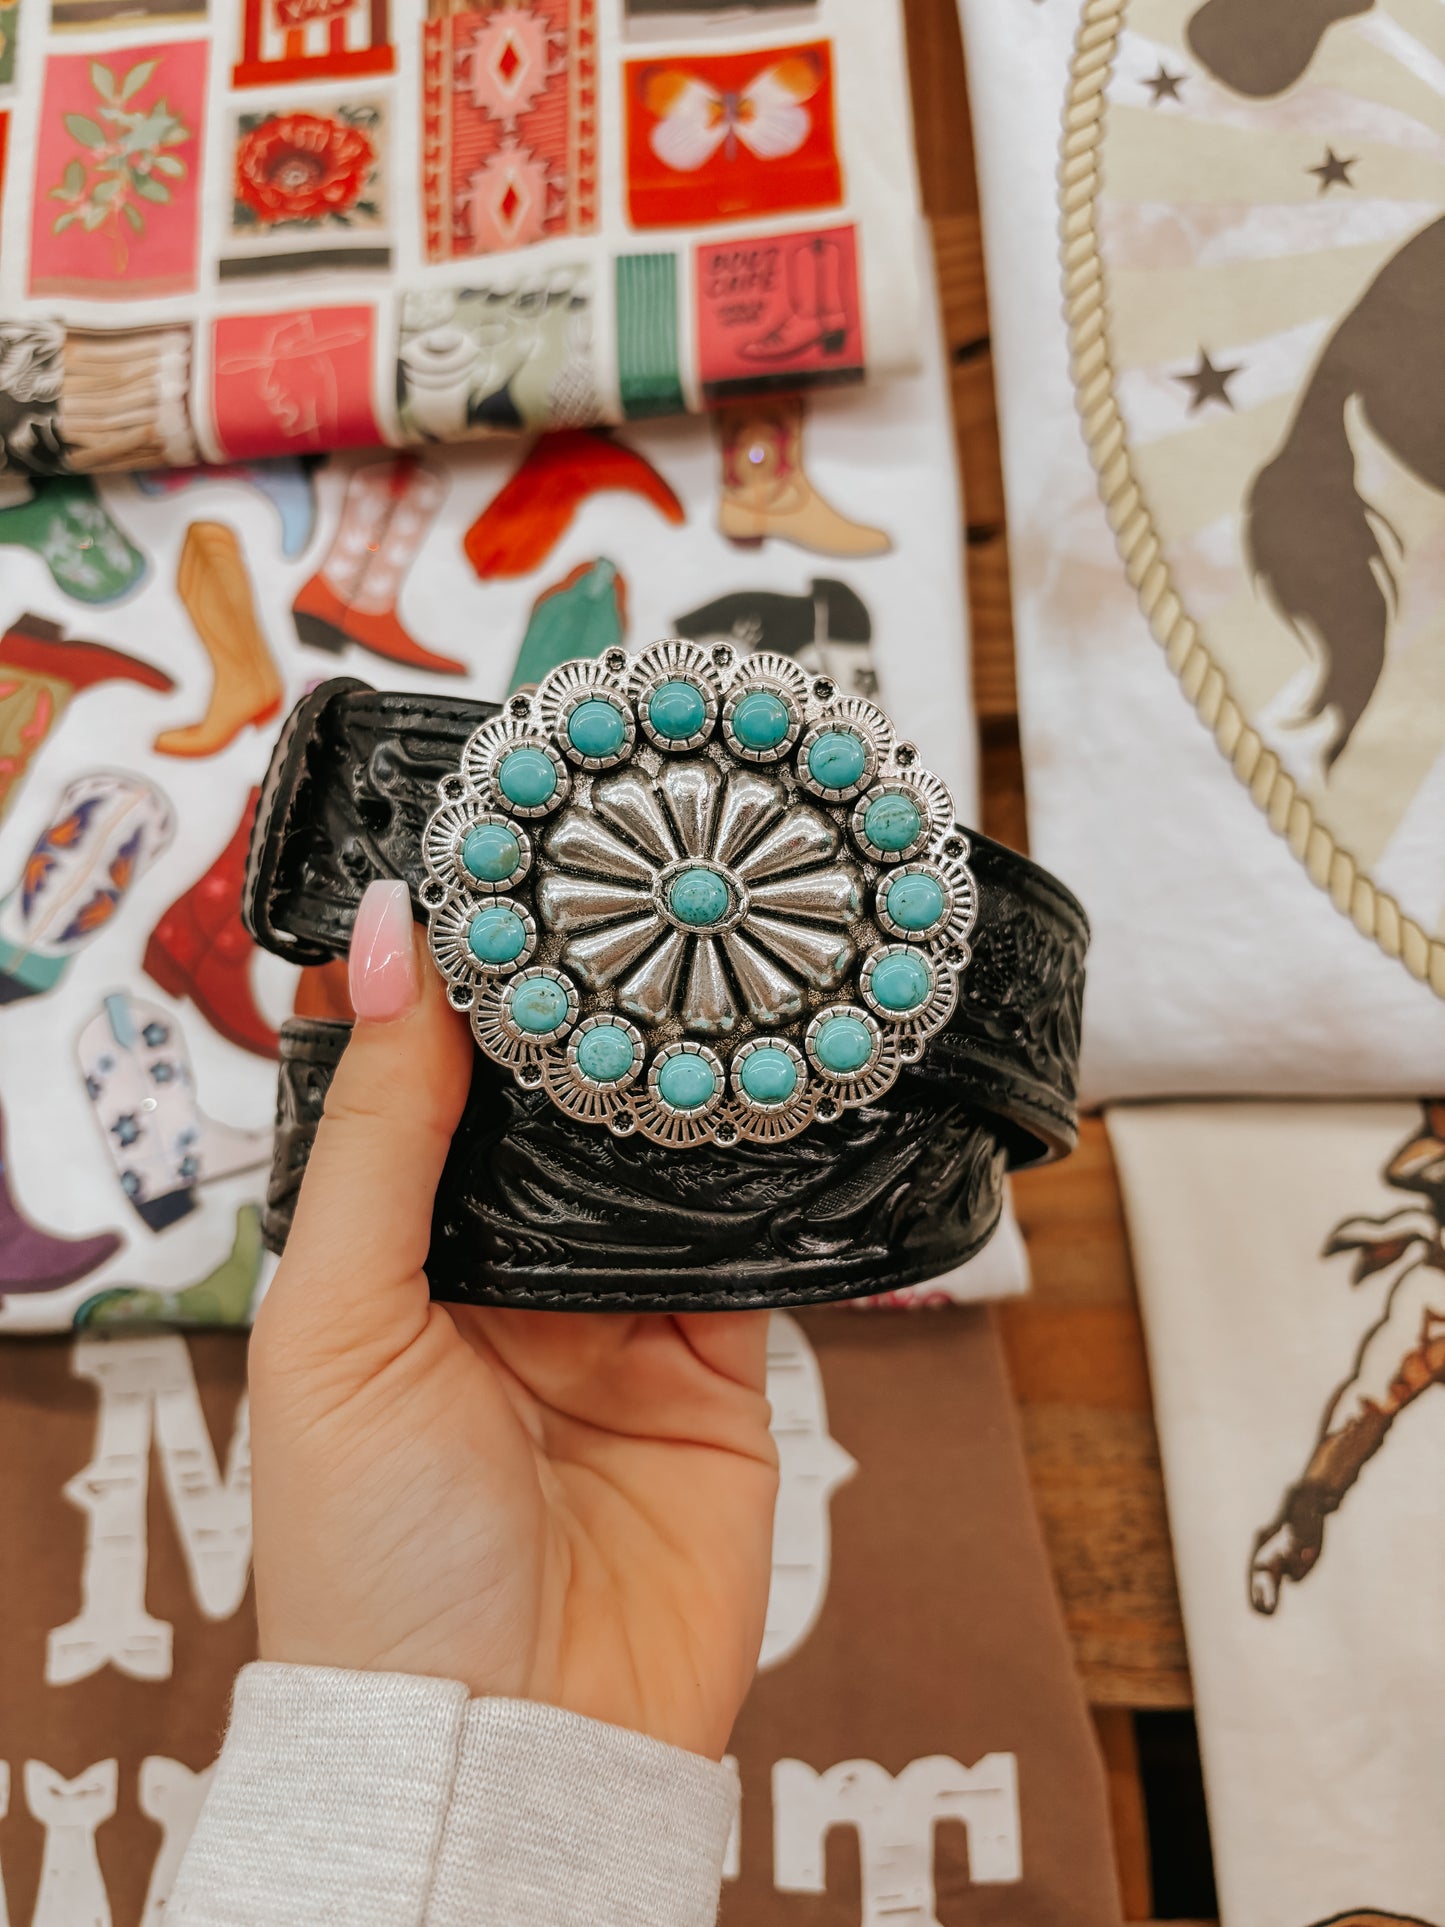 The Turquoise and Silver Round Concho Belt Buckle